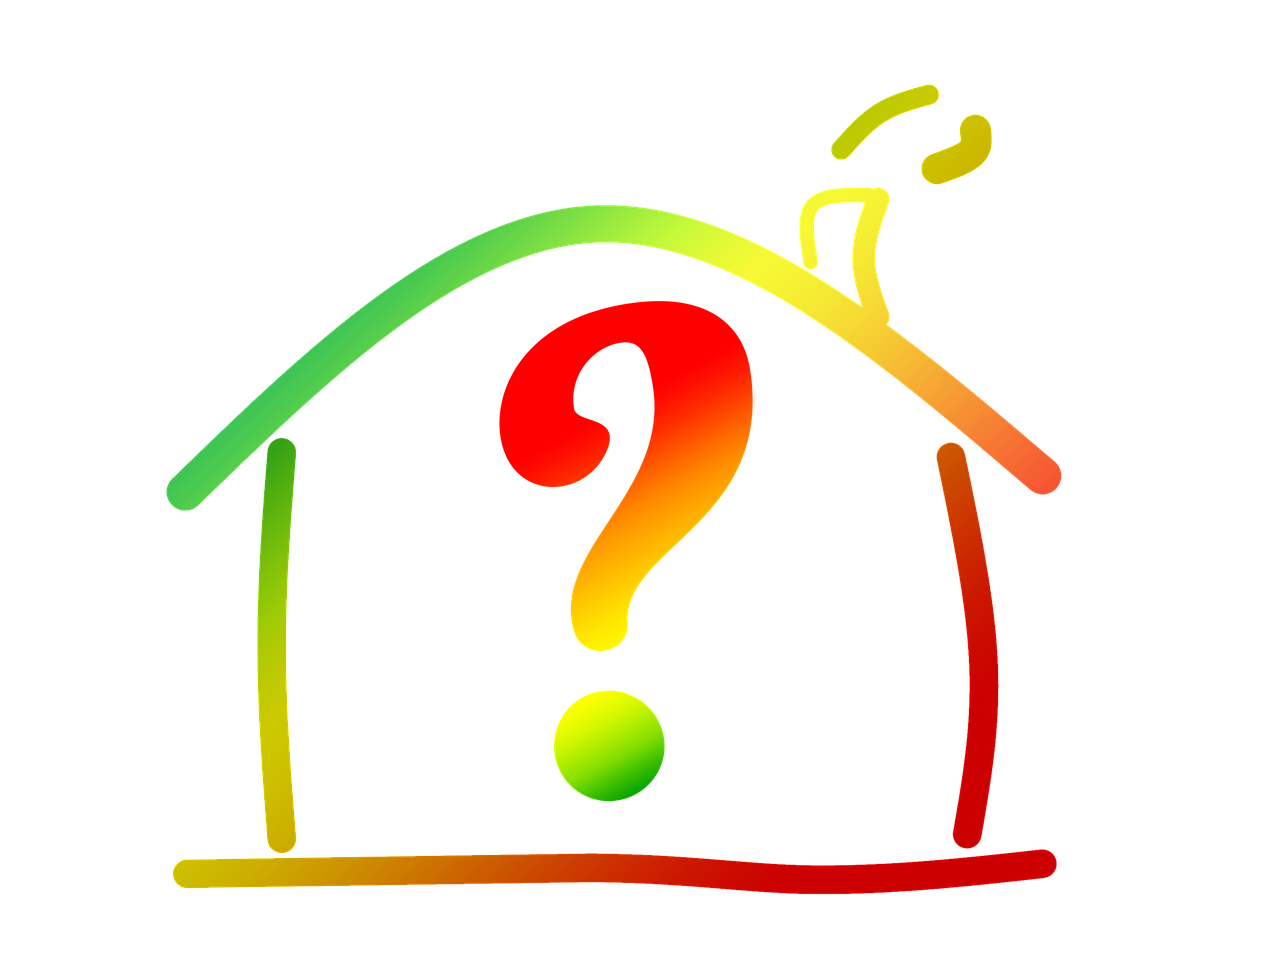 All the Spray Foam Insulation Questions